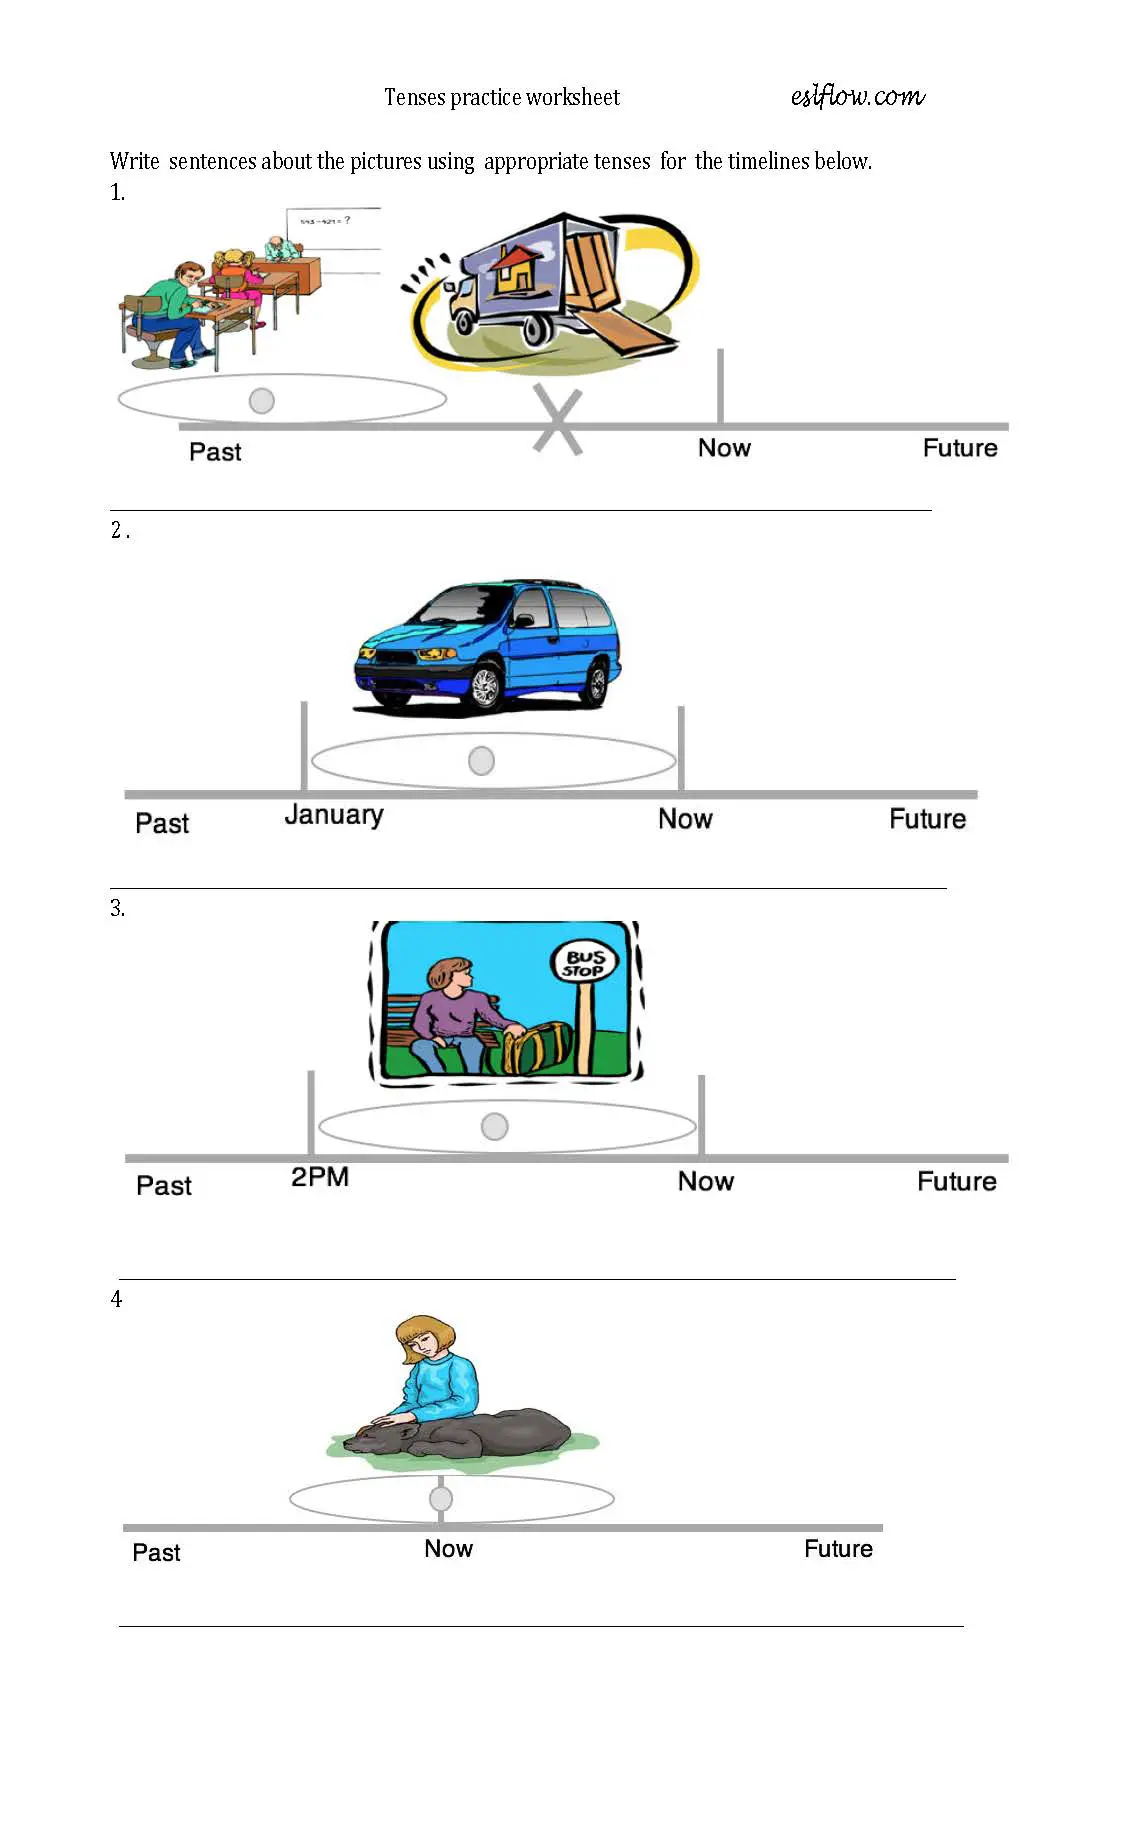 tenses-practice-worksheet-using-timelines-pictures-with-answers-pdf-eslflow